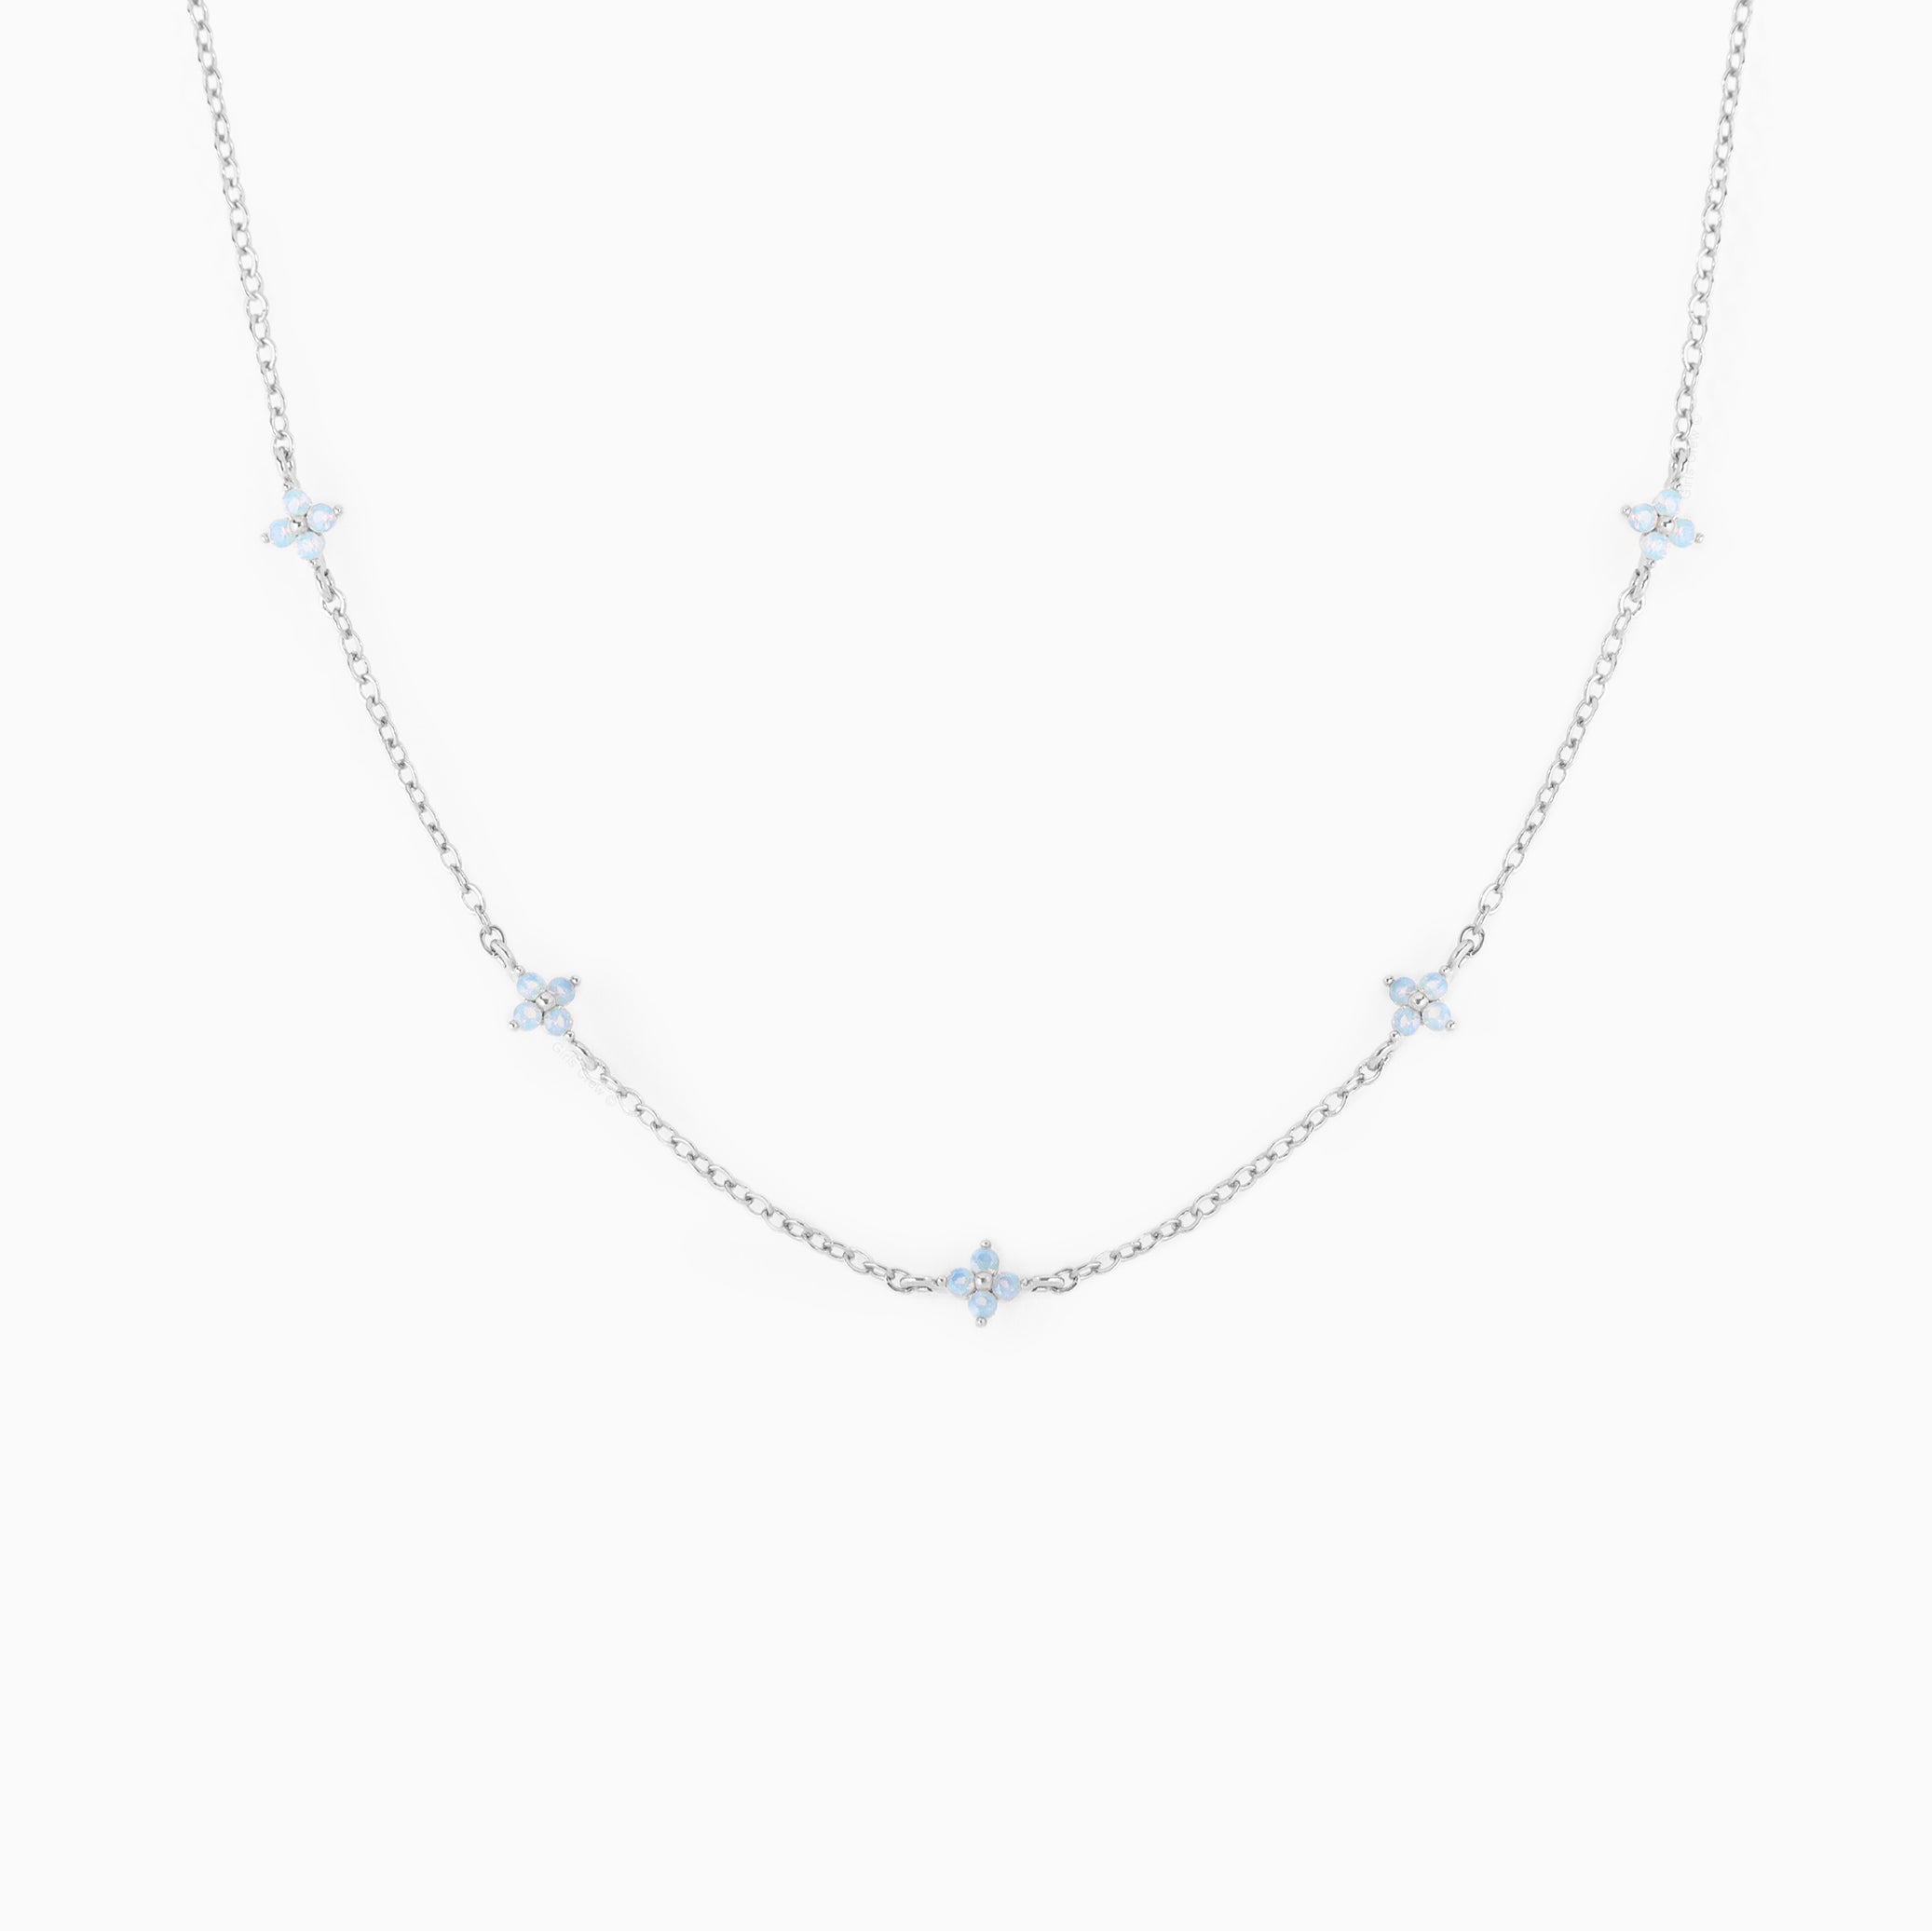 Blue Blossom Love Necklace